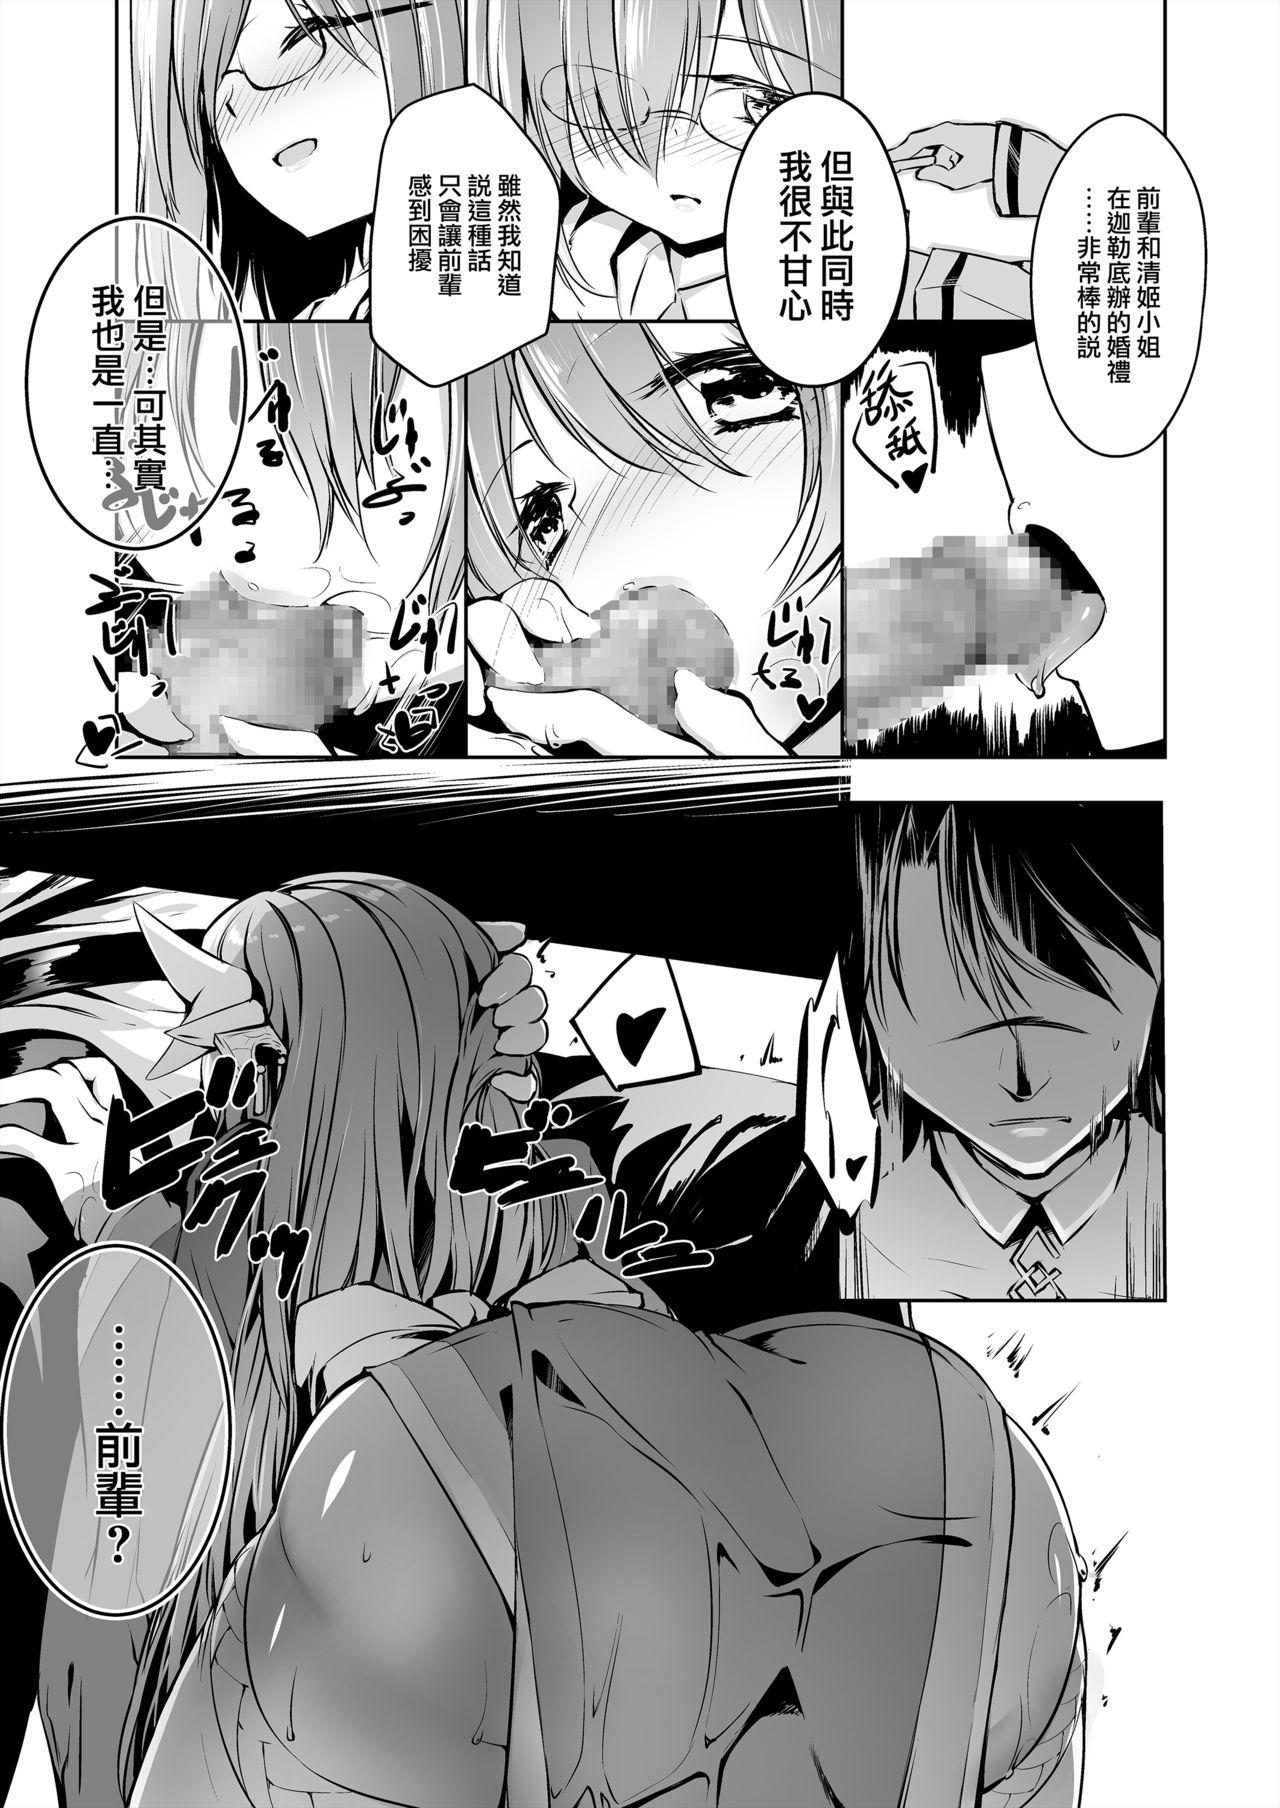 Joi Kiyohime Lovers vol. 02 - Fate grand order Gloryhole - Page 11